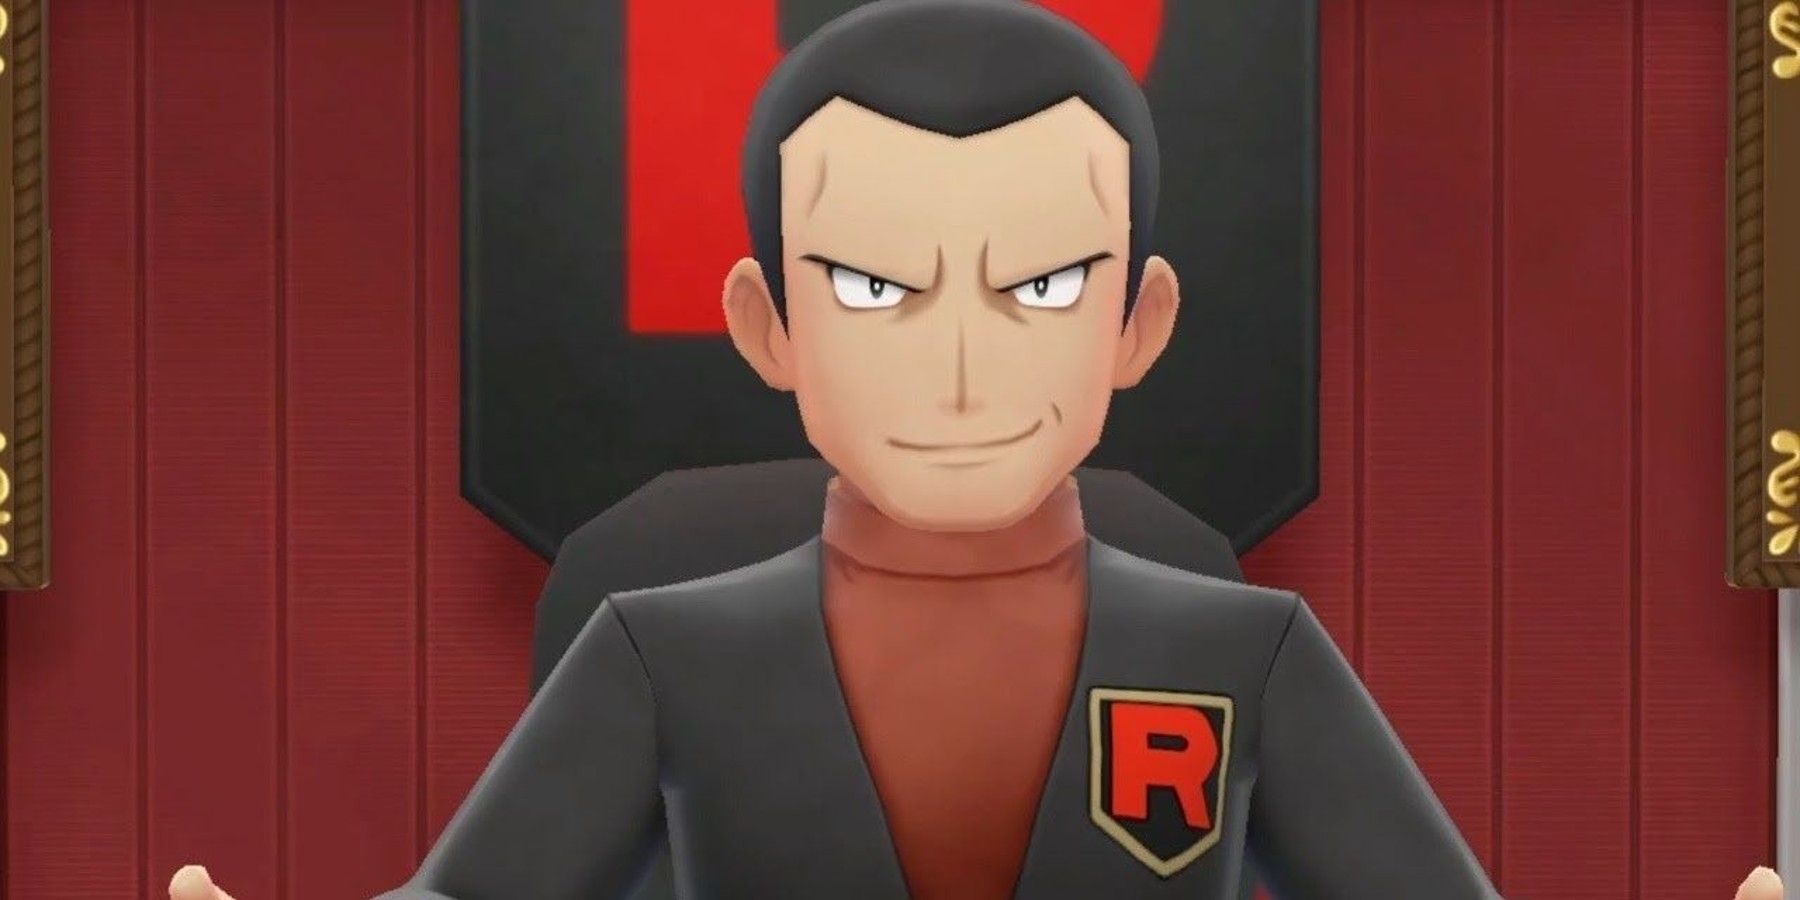 Pokemon GO Team Rocket Special Research Glitch Lets Players Beat Giovanni Without 'Finding' Him